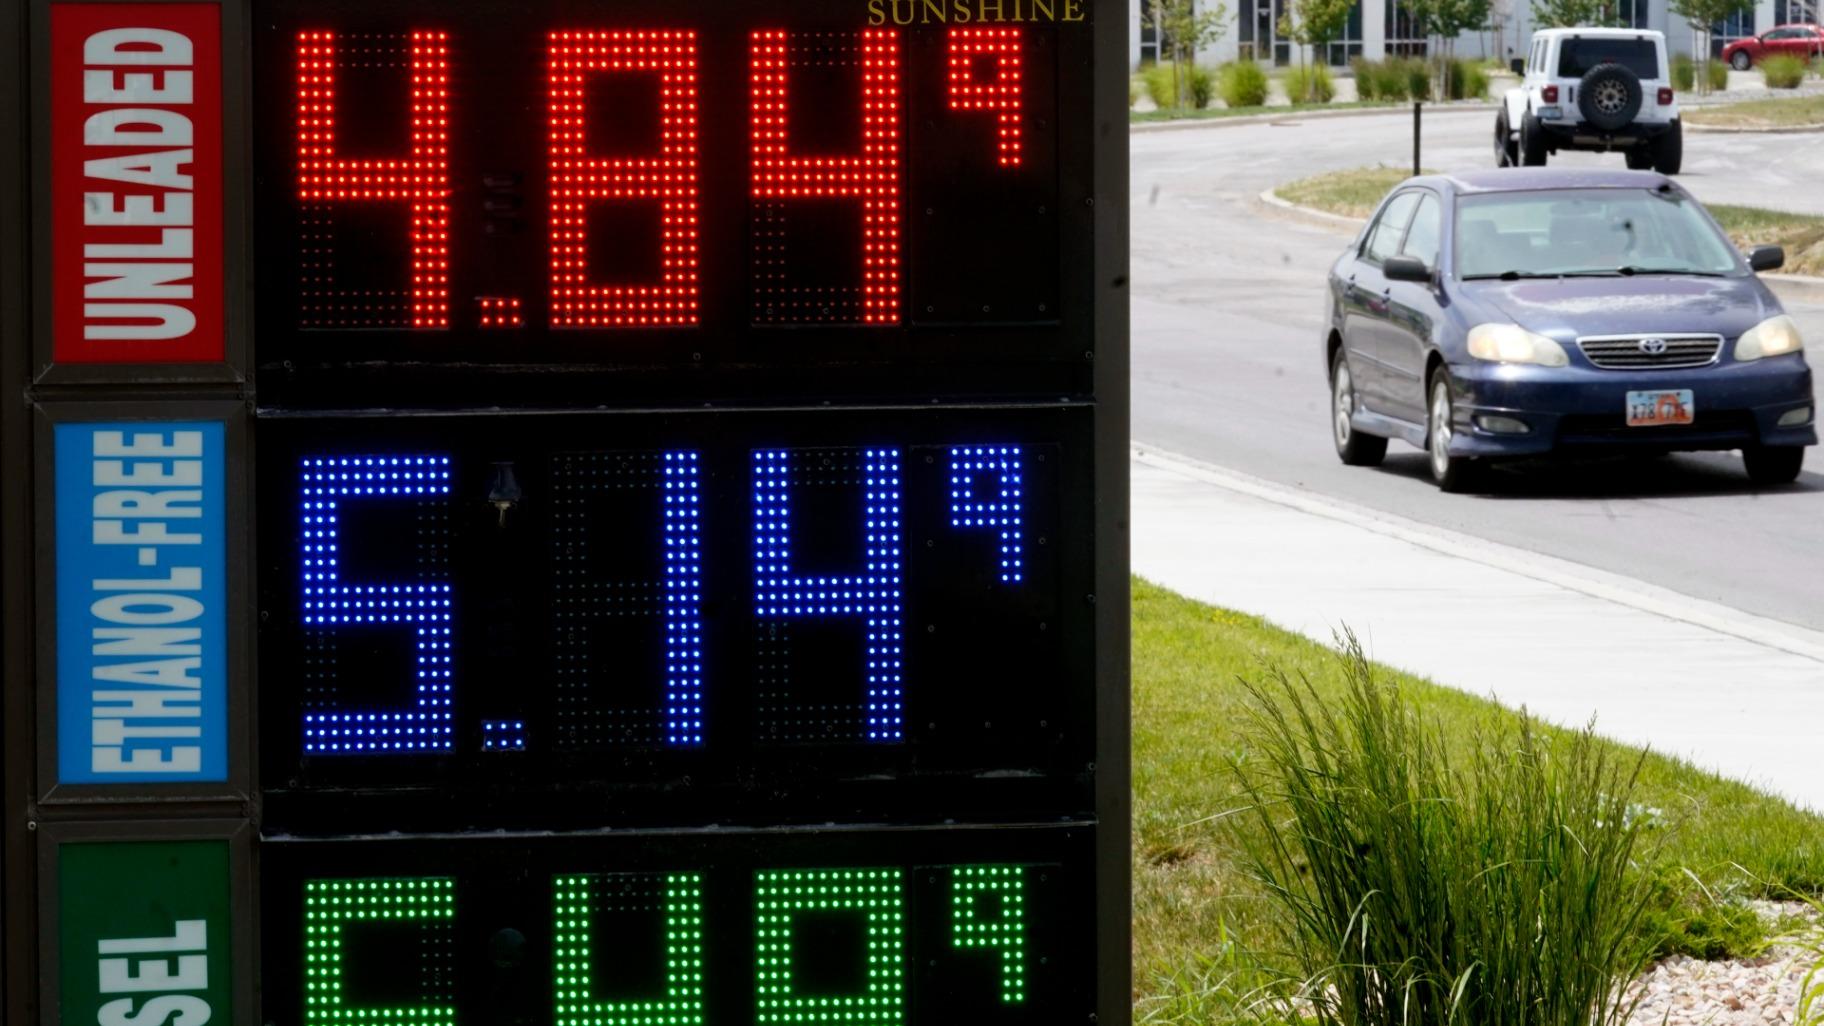 Gasoline prices are shown at a gas station on June 9, 2022, in Salt Lake City. (AP Photo / Rick Bowmer, File)